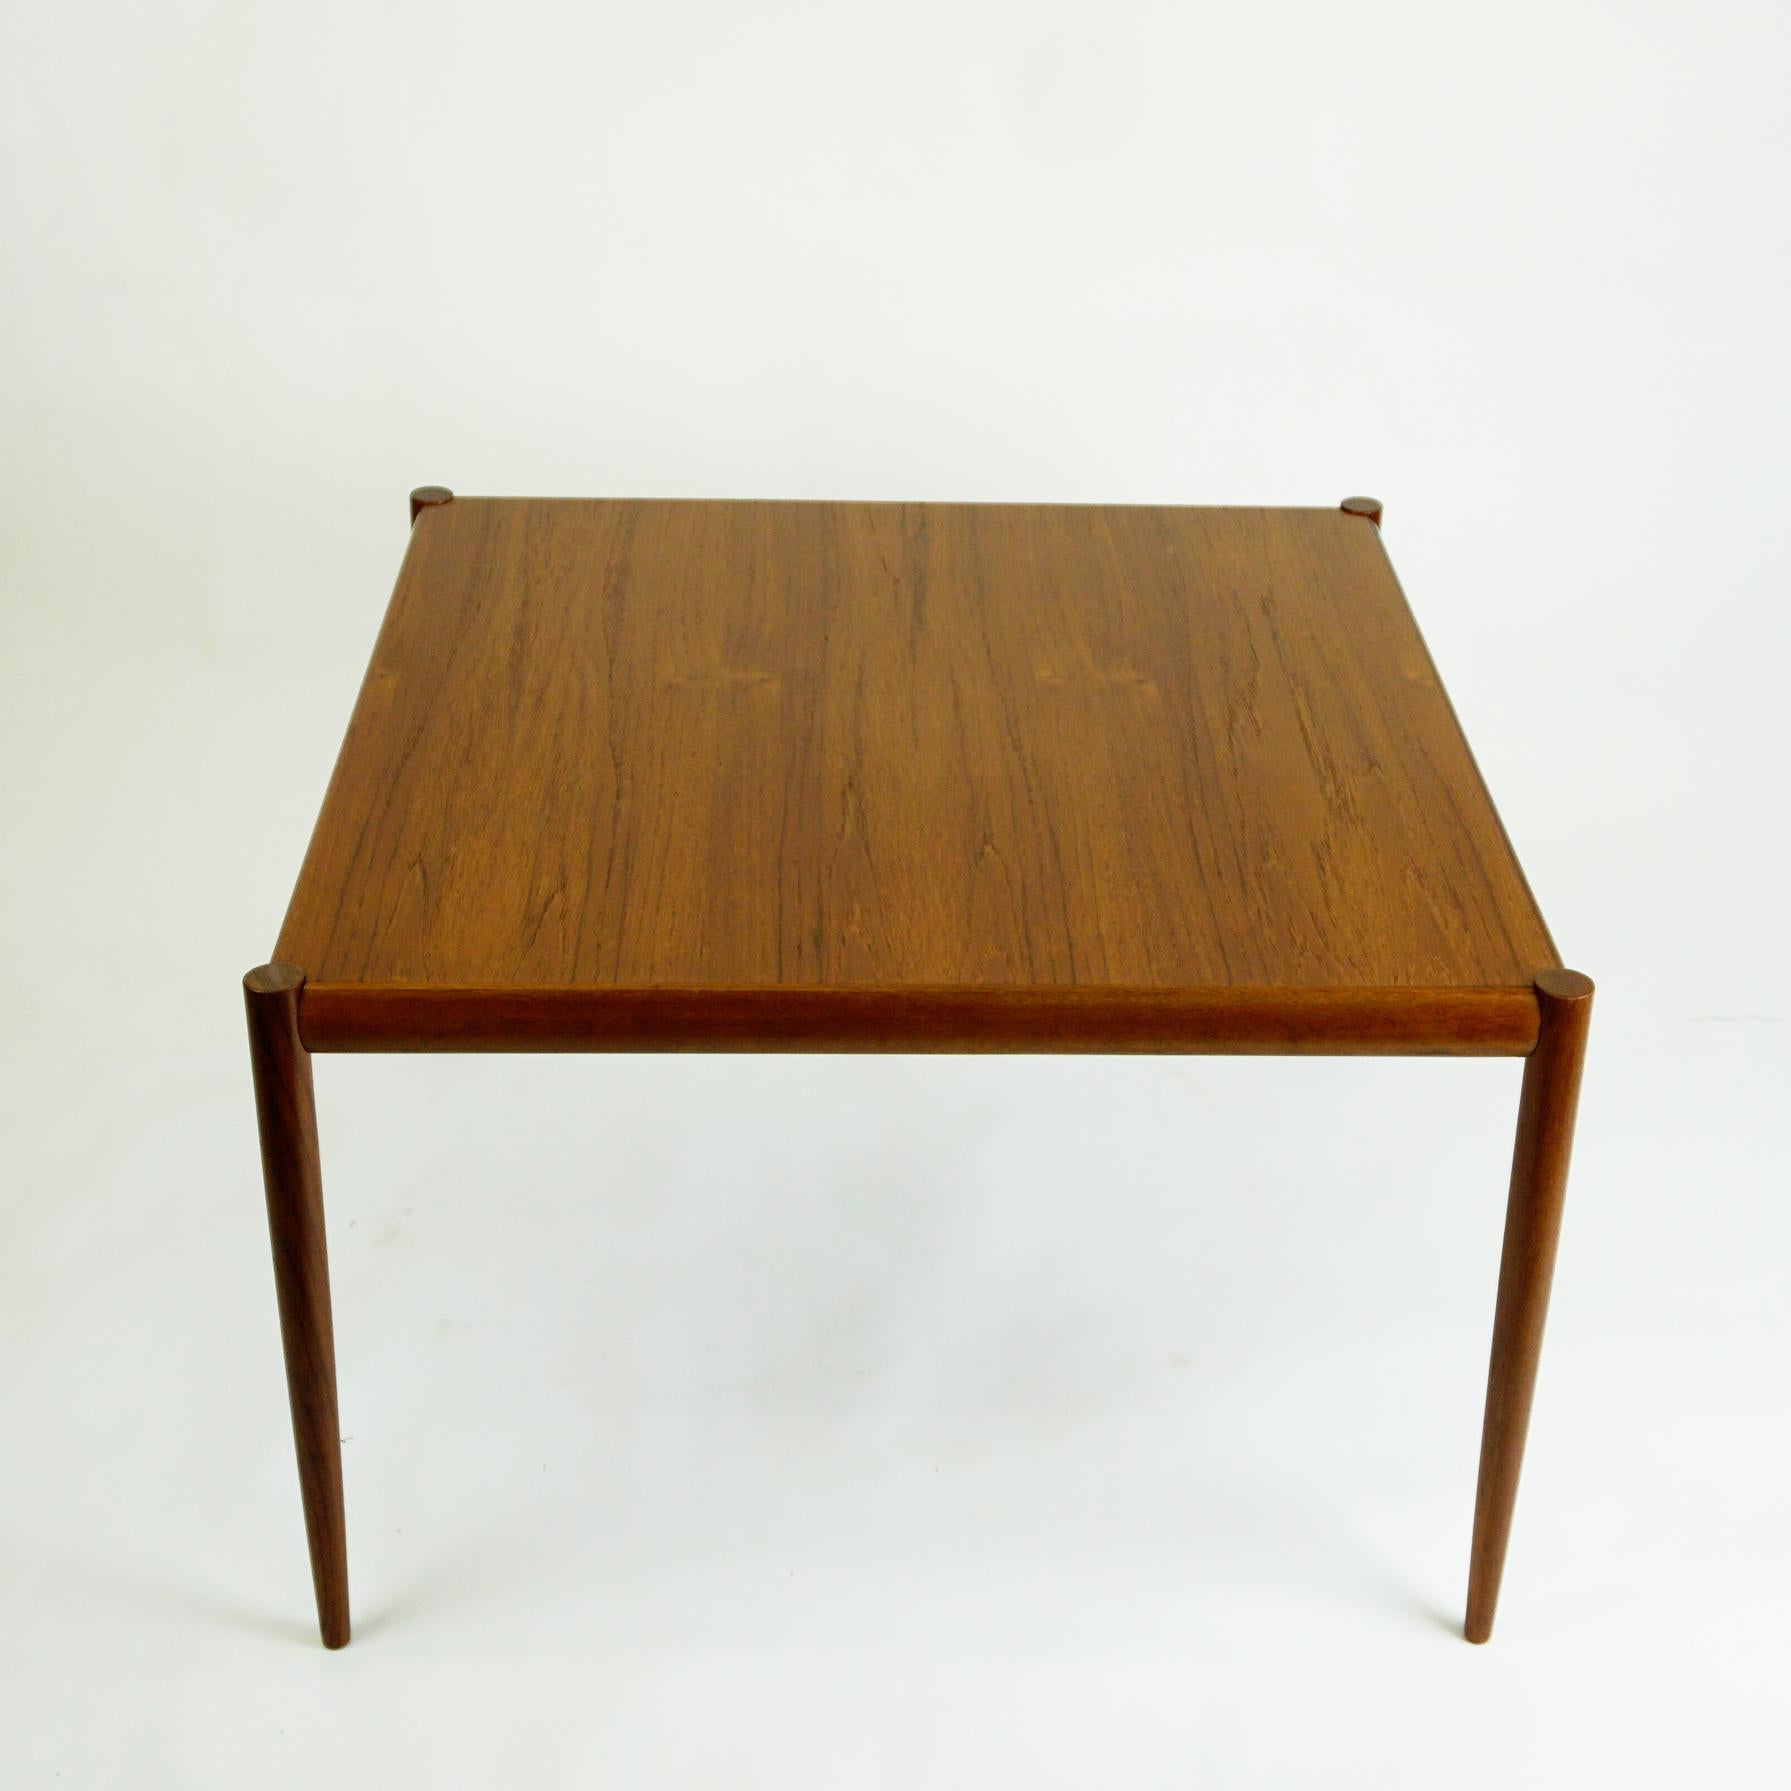 Beautiful handcrafted Scandinavian Modern square teak coffee table produced in Denmark in the 1960s, perfect addition to any Scandinavian Modern sofas, armchairs or easy chairs.
Marked Made in Denmark on the underside.